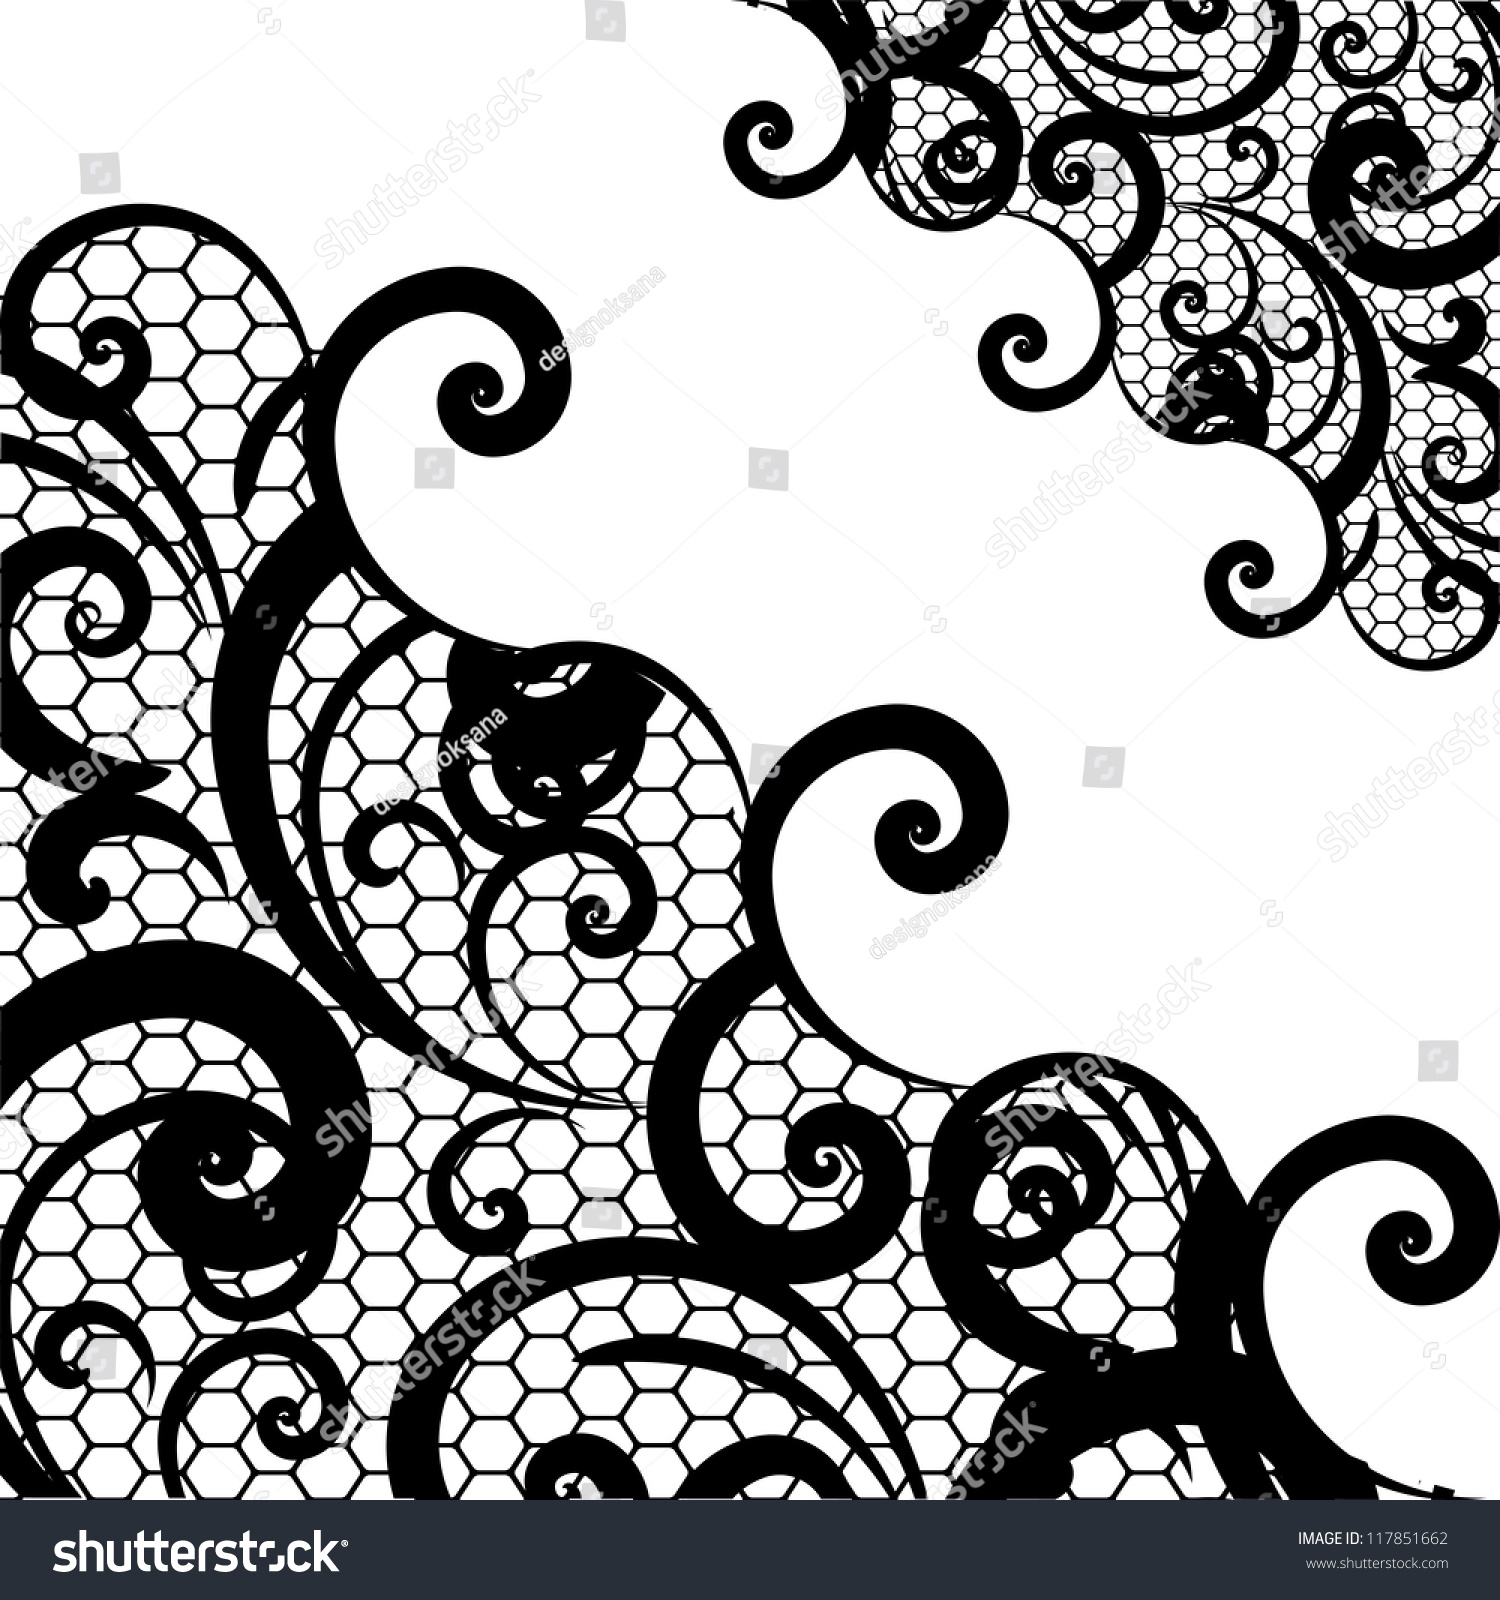 Vector Lace Background Stock Vector 117851662 - Shutterstock